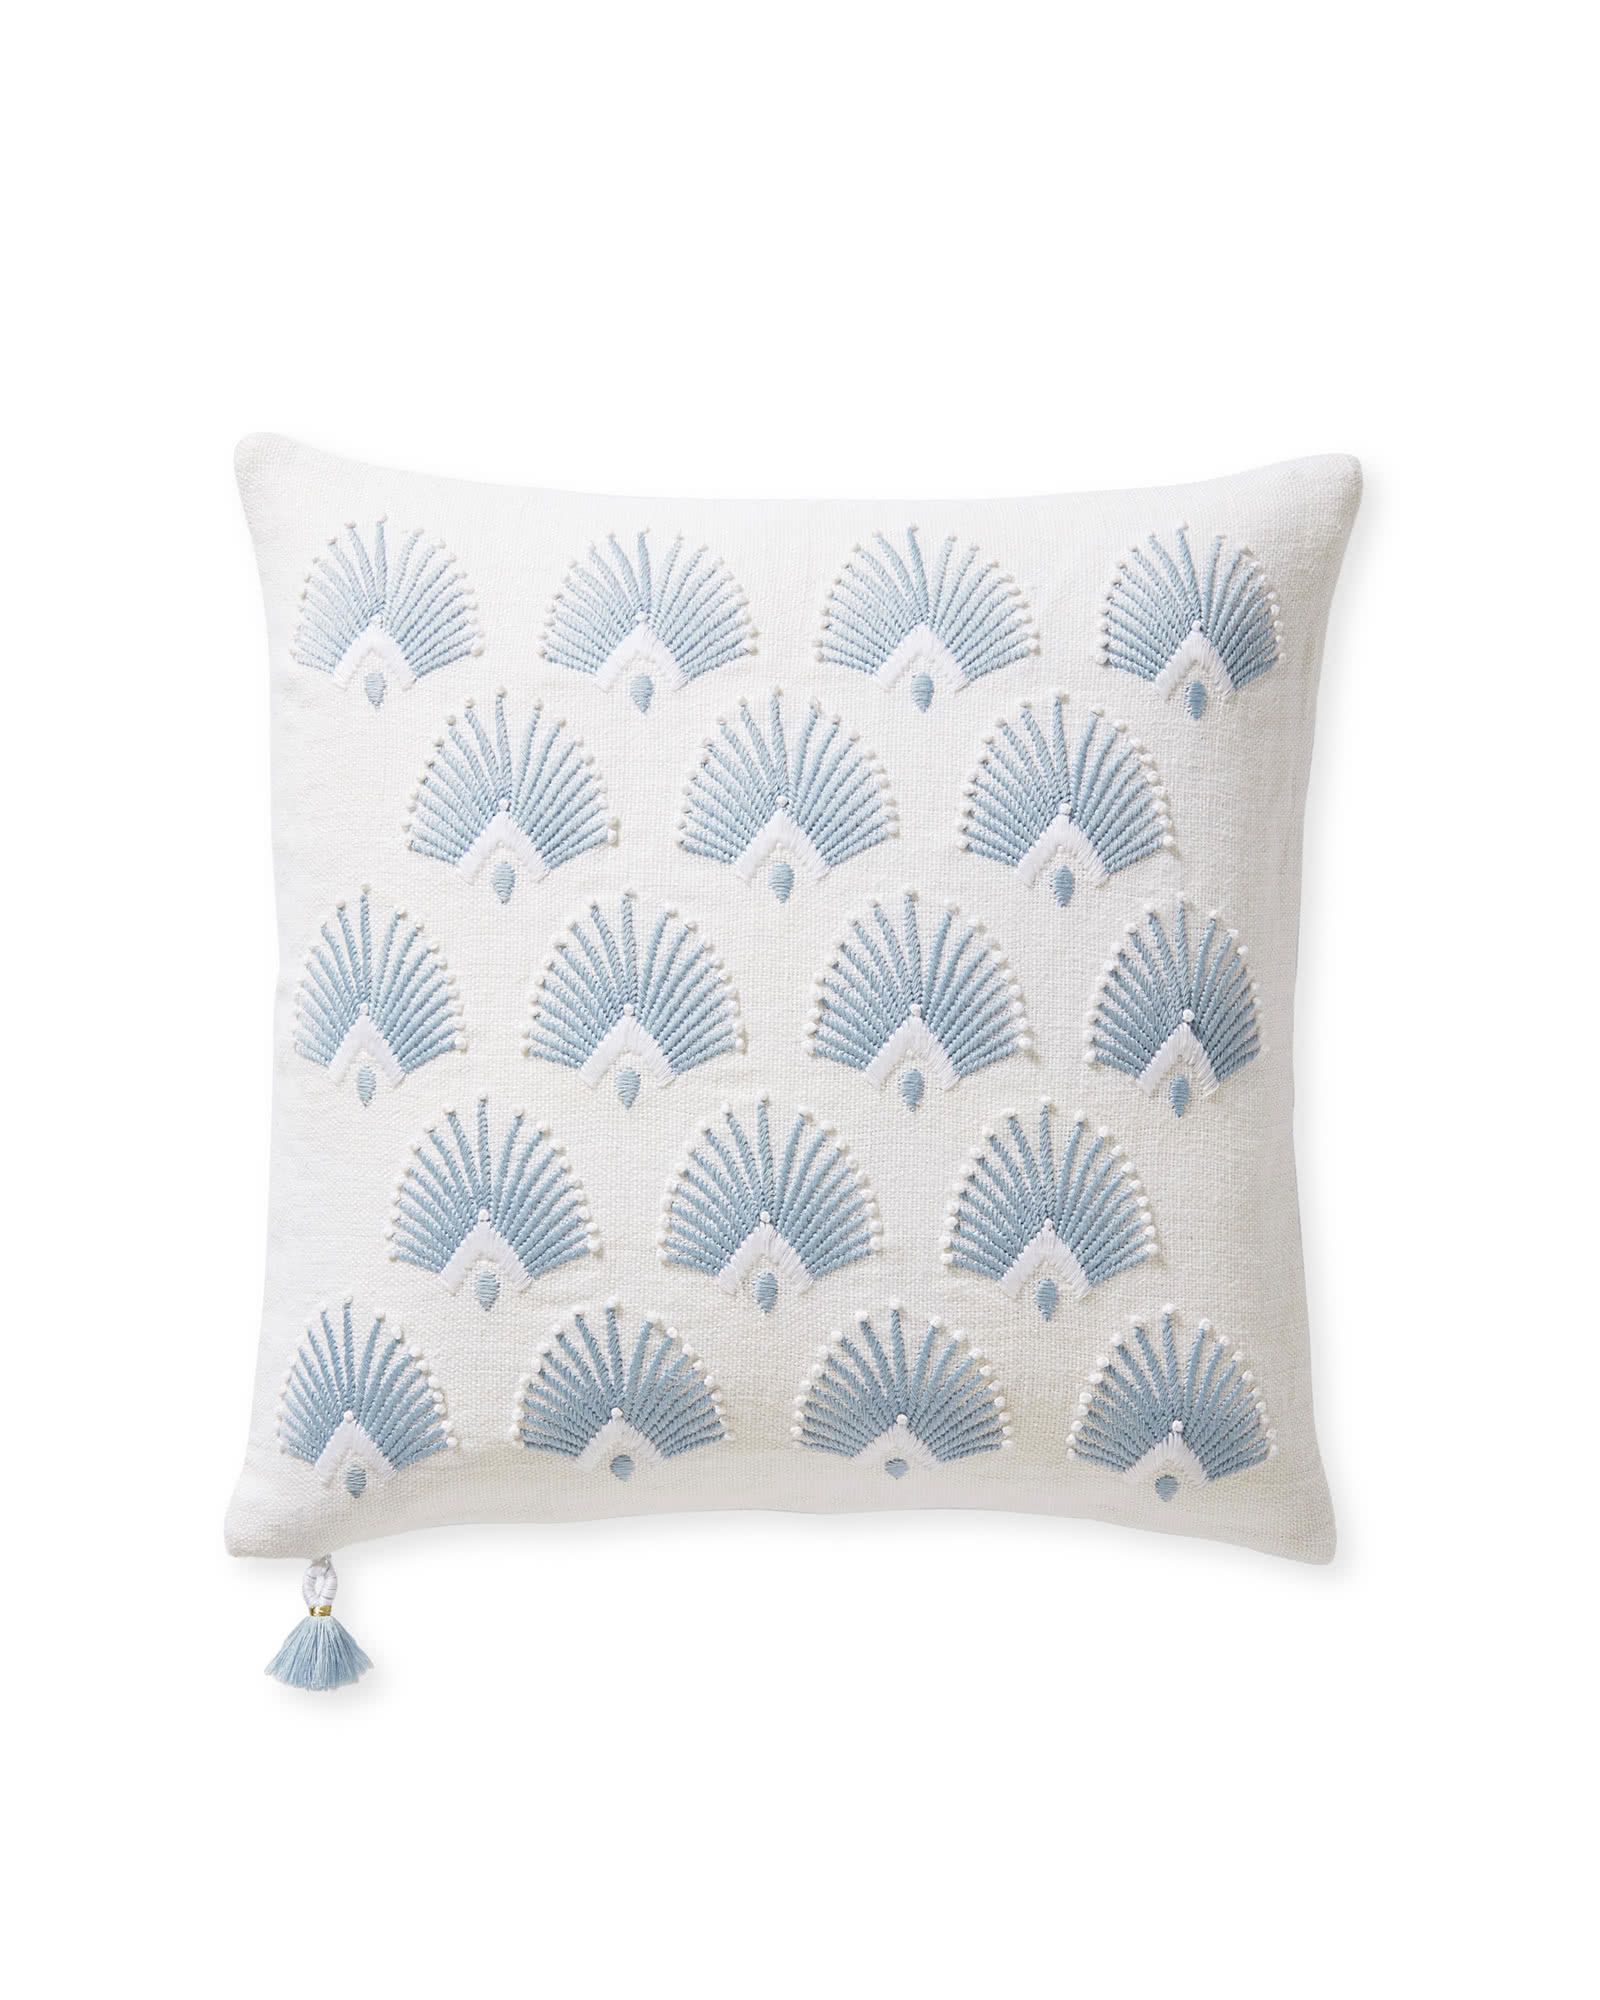 Monarch Pillow Cover | Serena and Lily